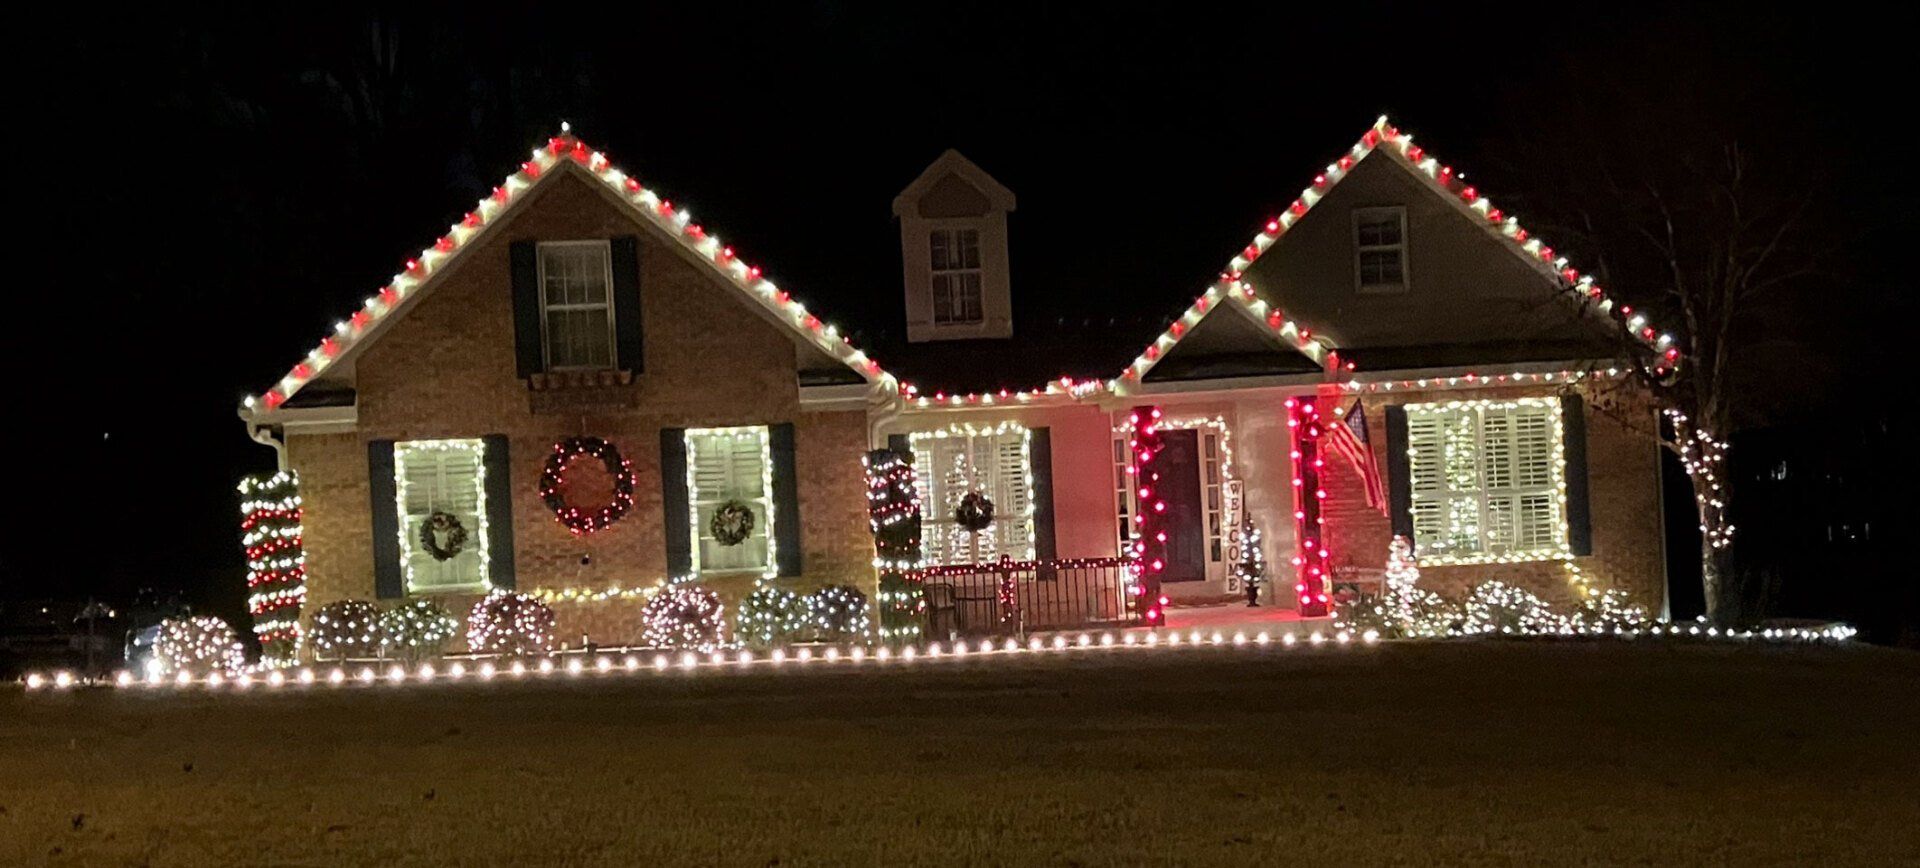 Holiday Home Decorating Contest